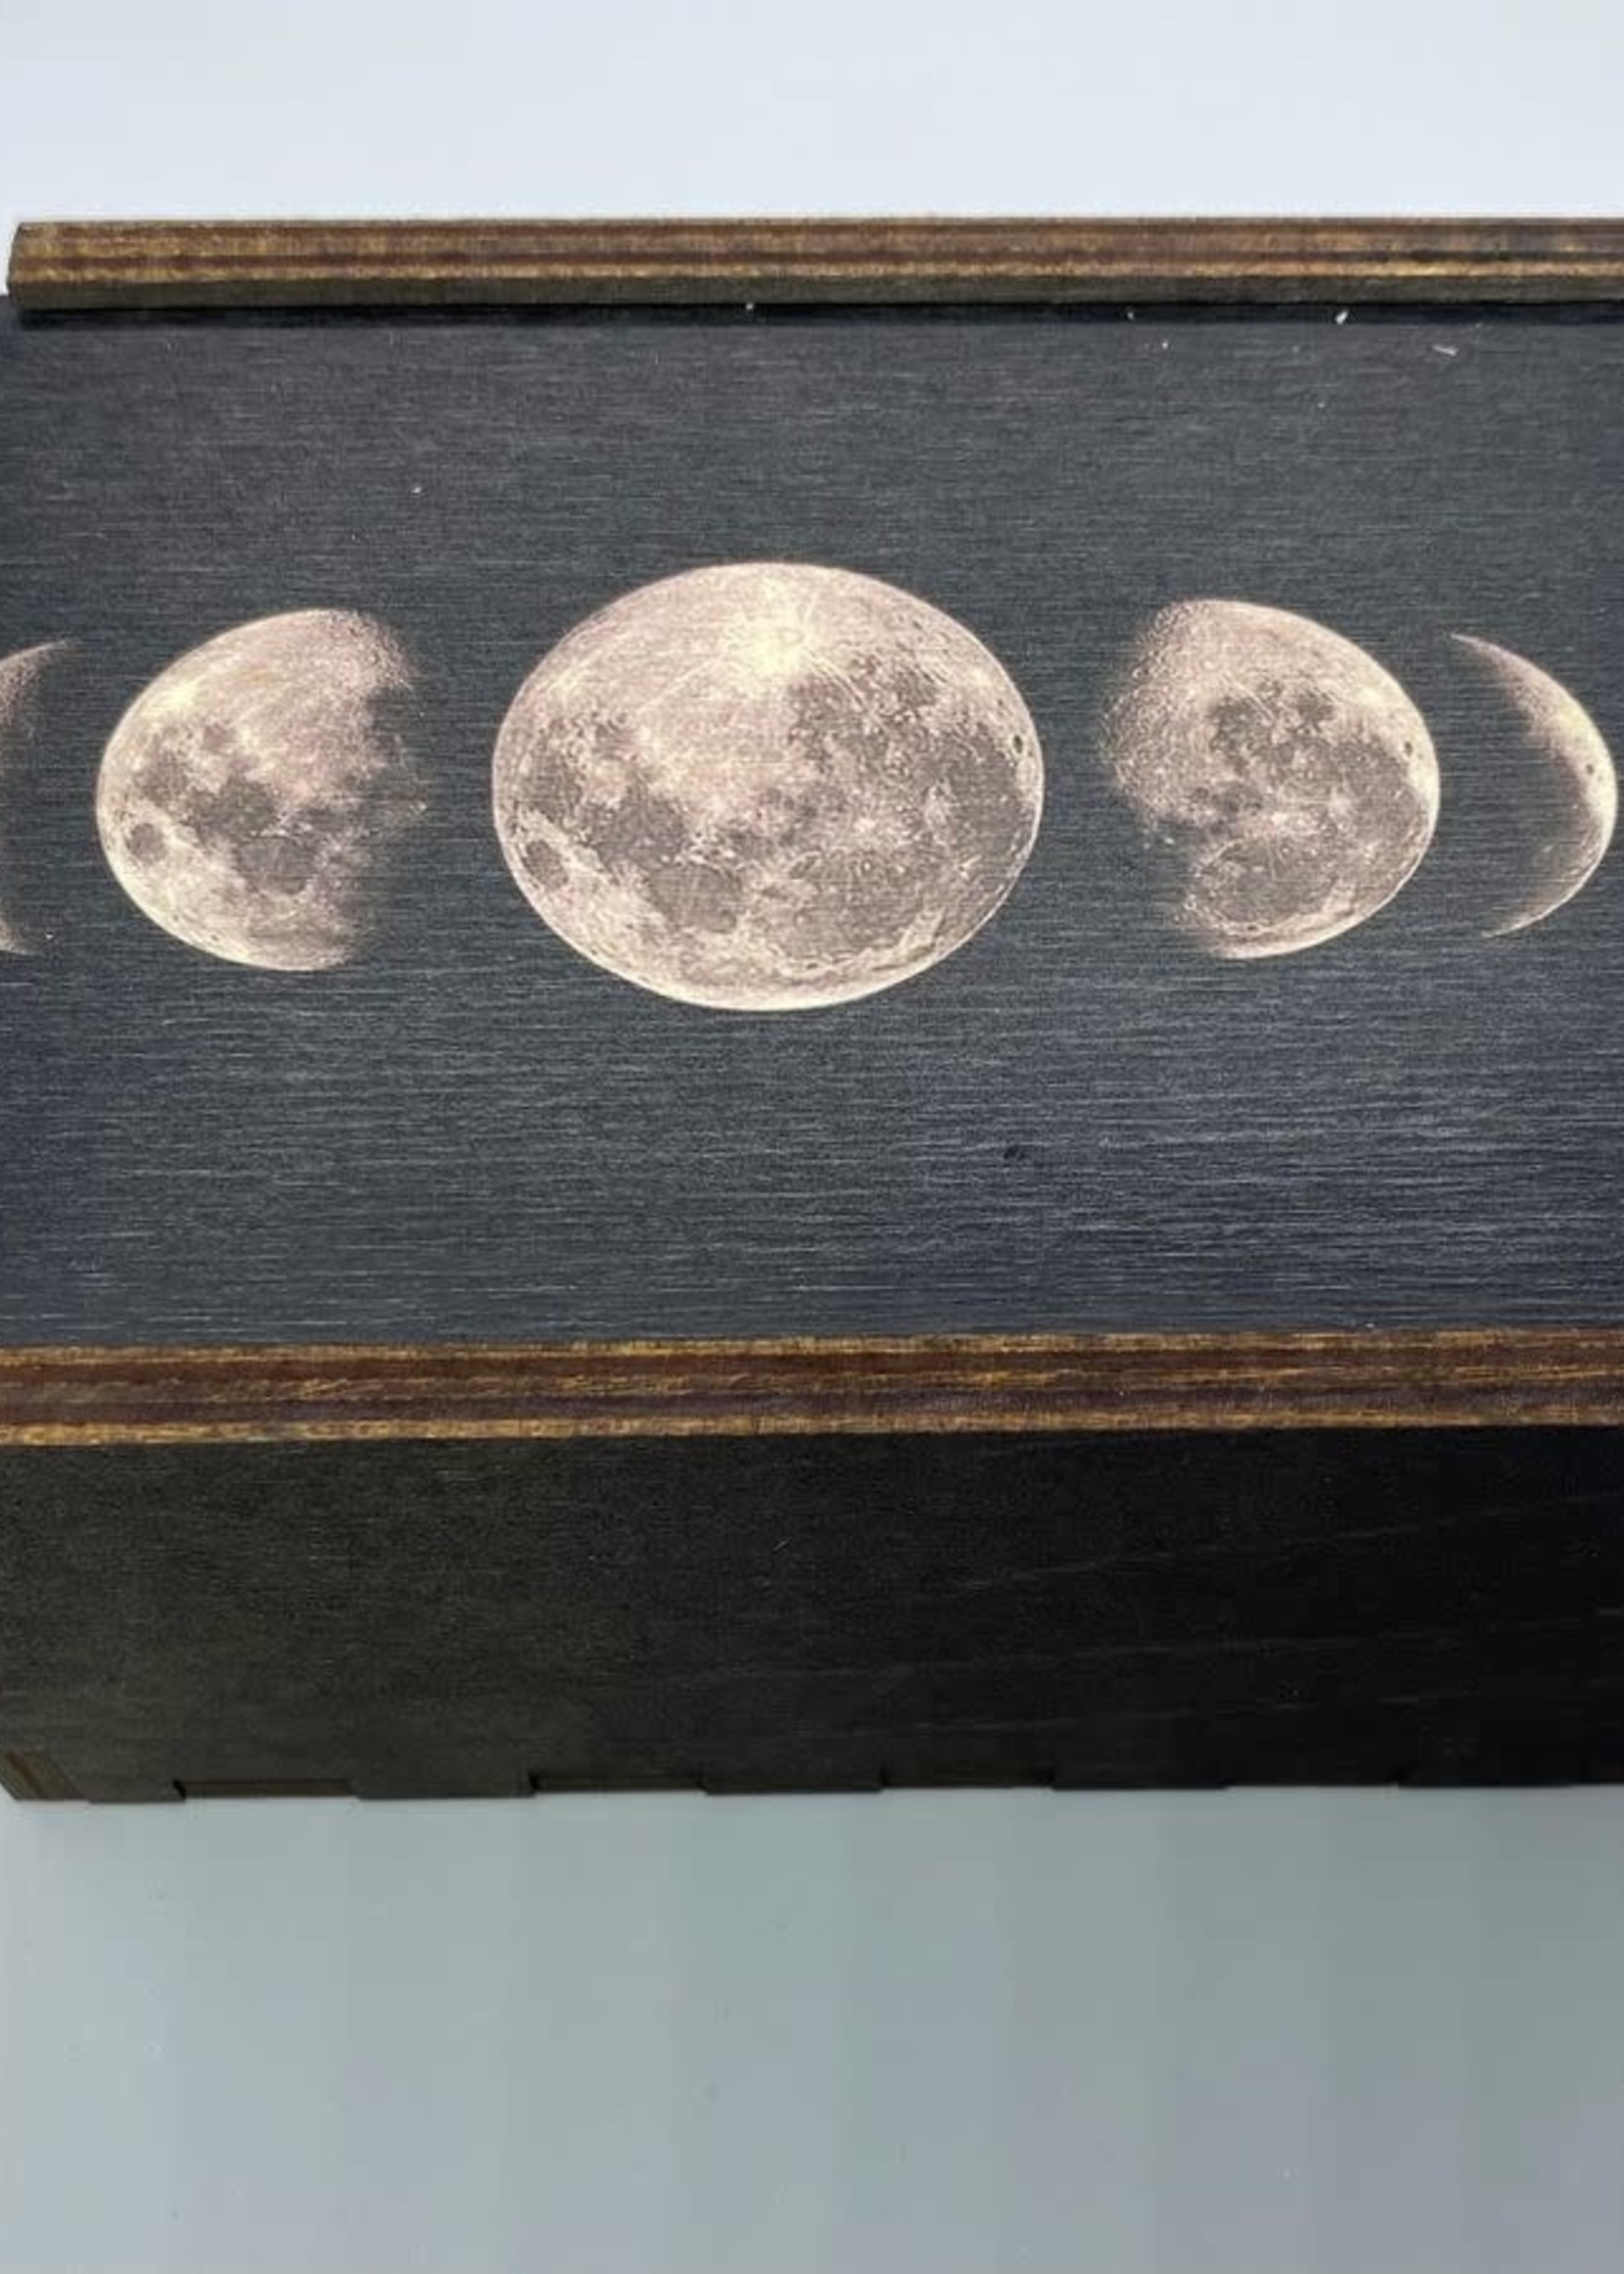 Most Amazing Boxes: Moon Phases 4x6